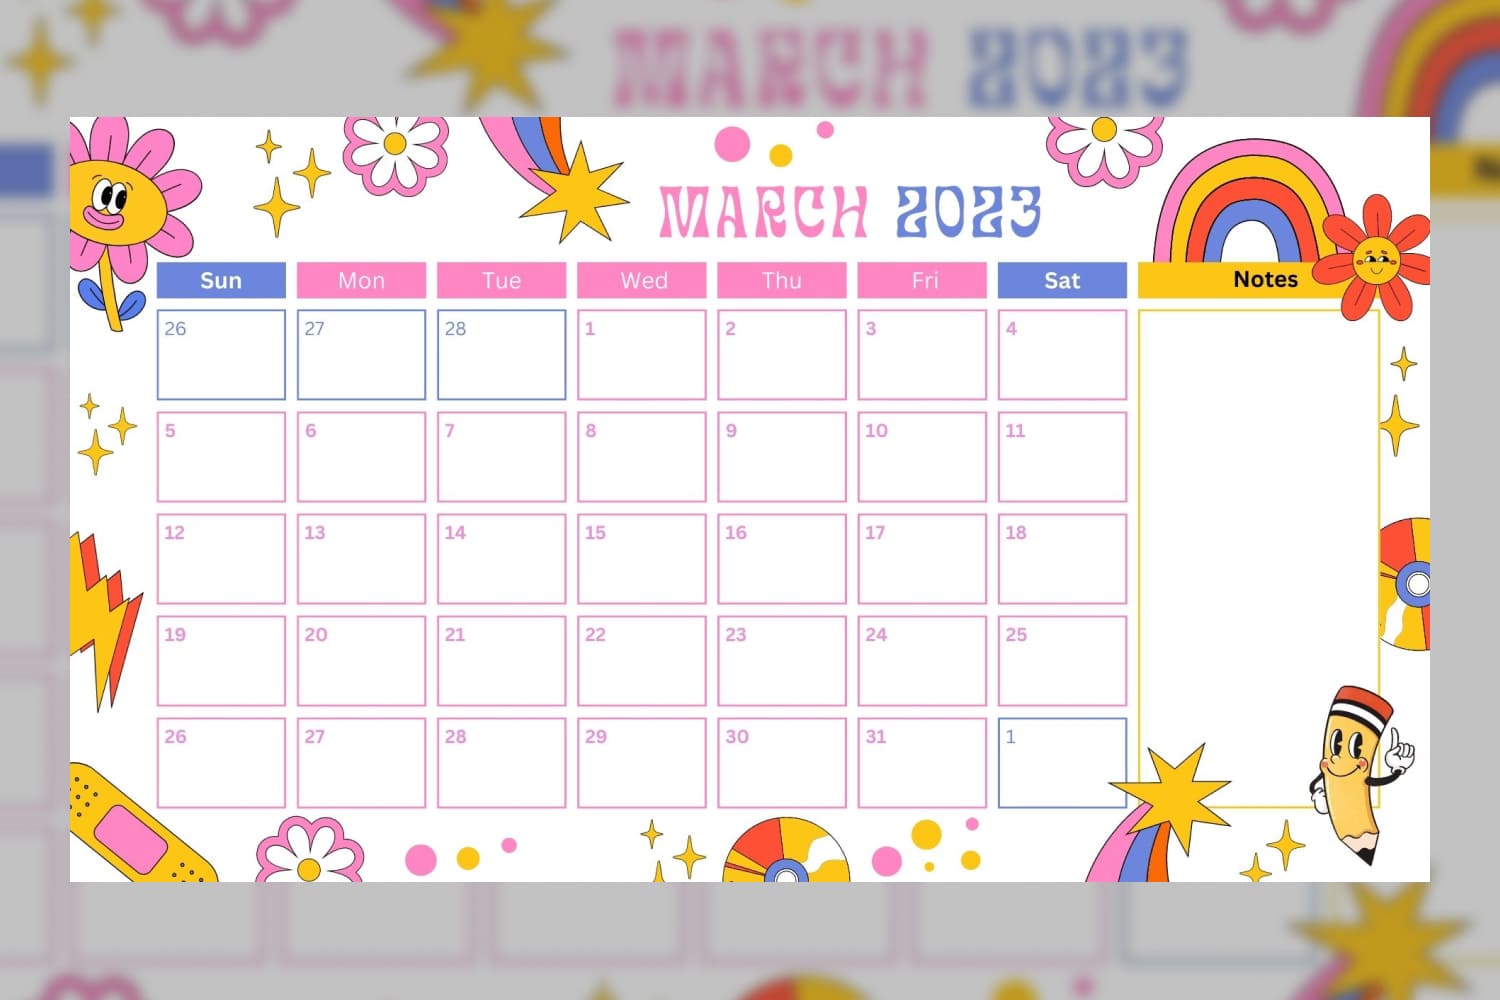 March 2023 calendar with a charming and playful design with cartoon characters and flowers.